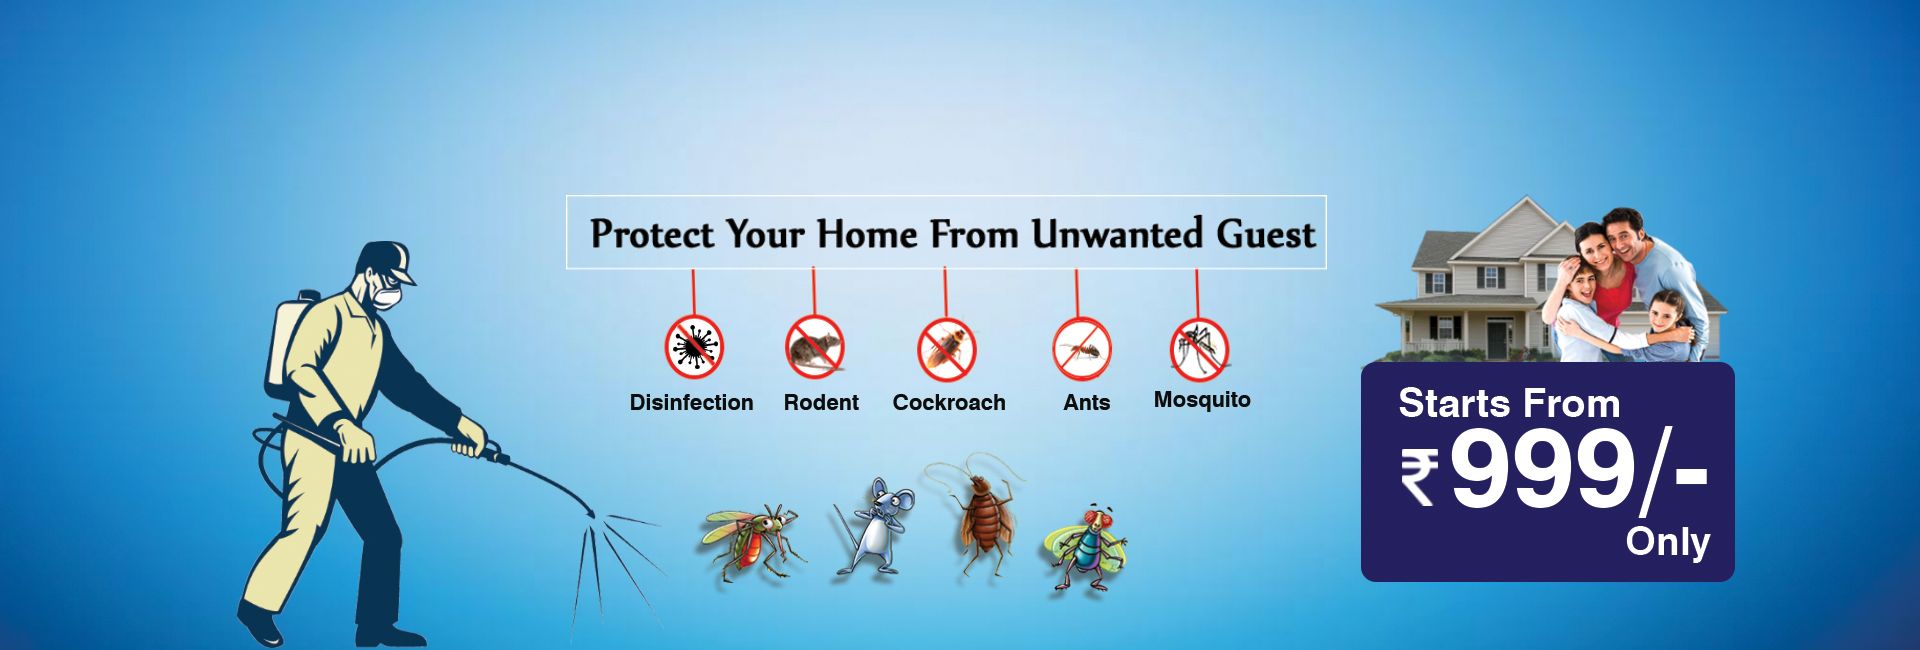 Mosquito Control In Ahmedabad | Mosquito Fogging - Dr Rex